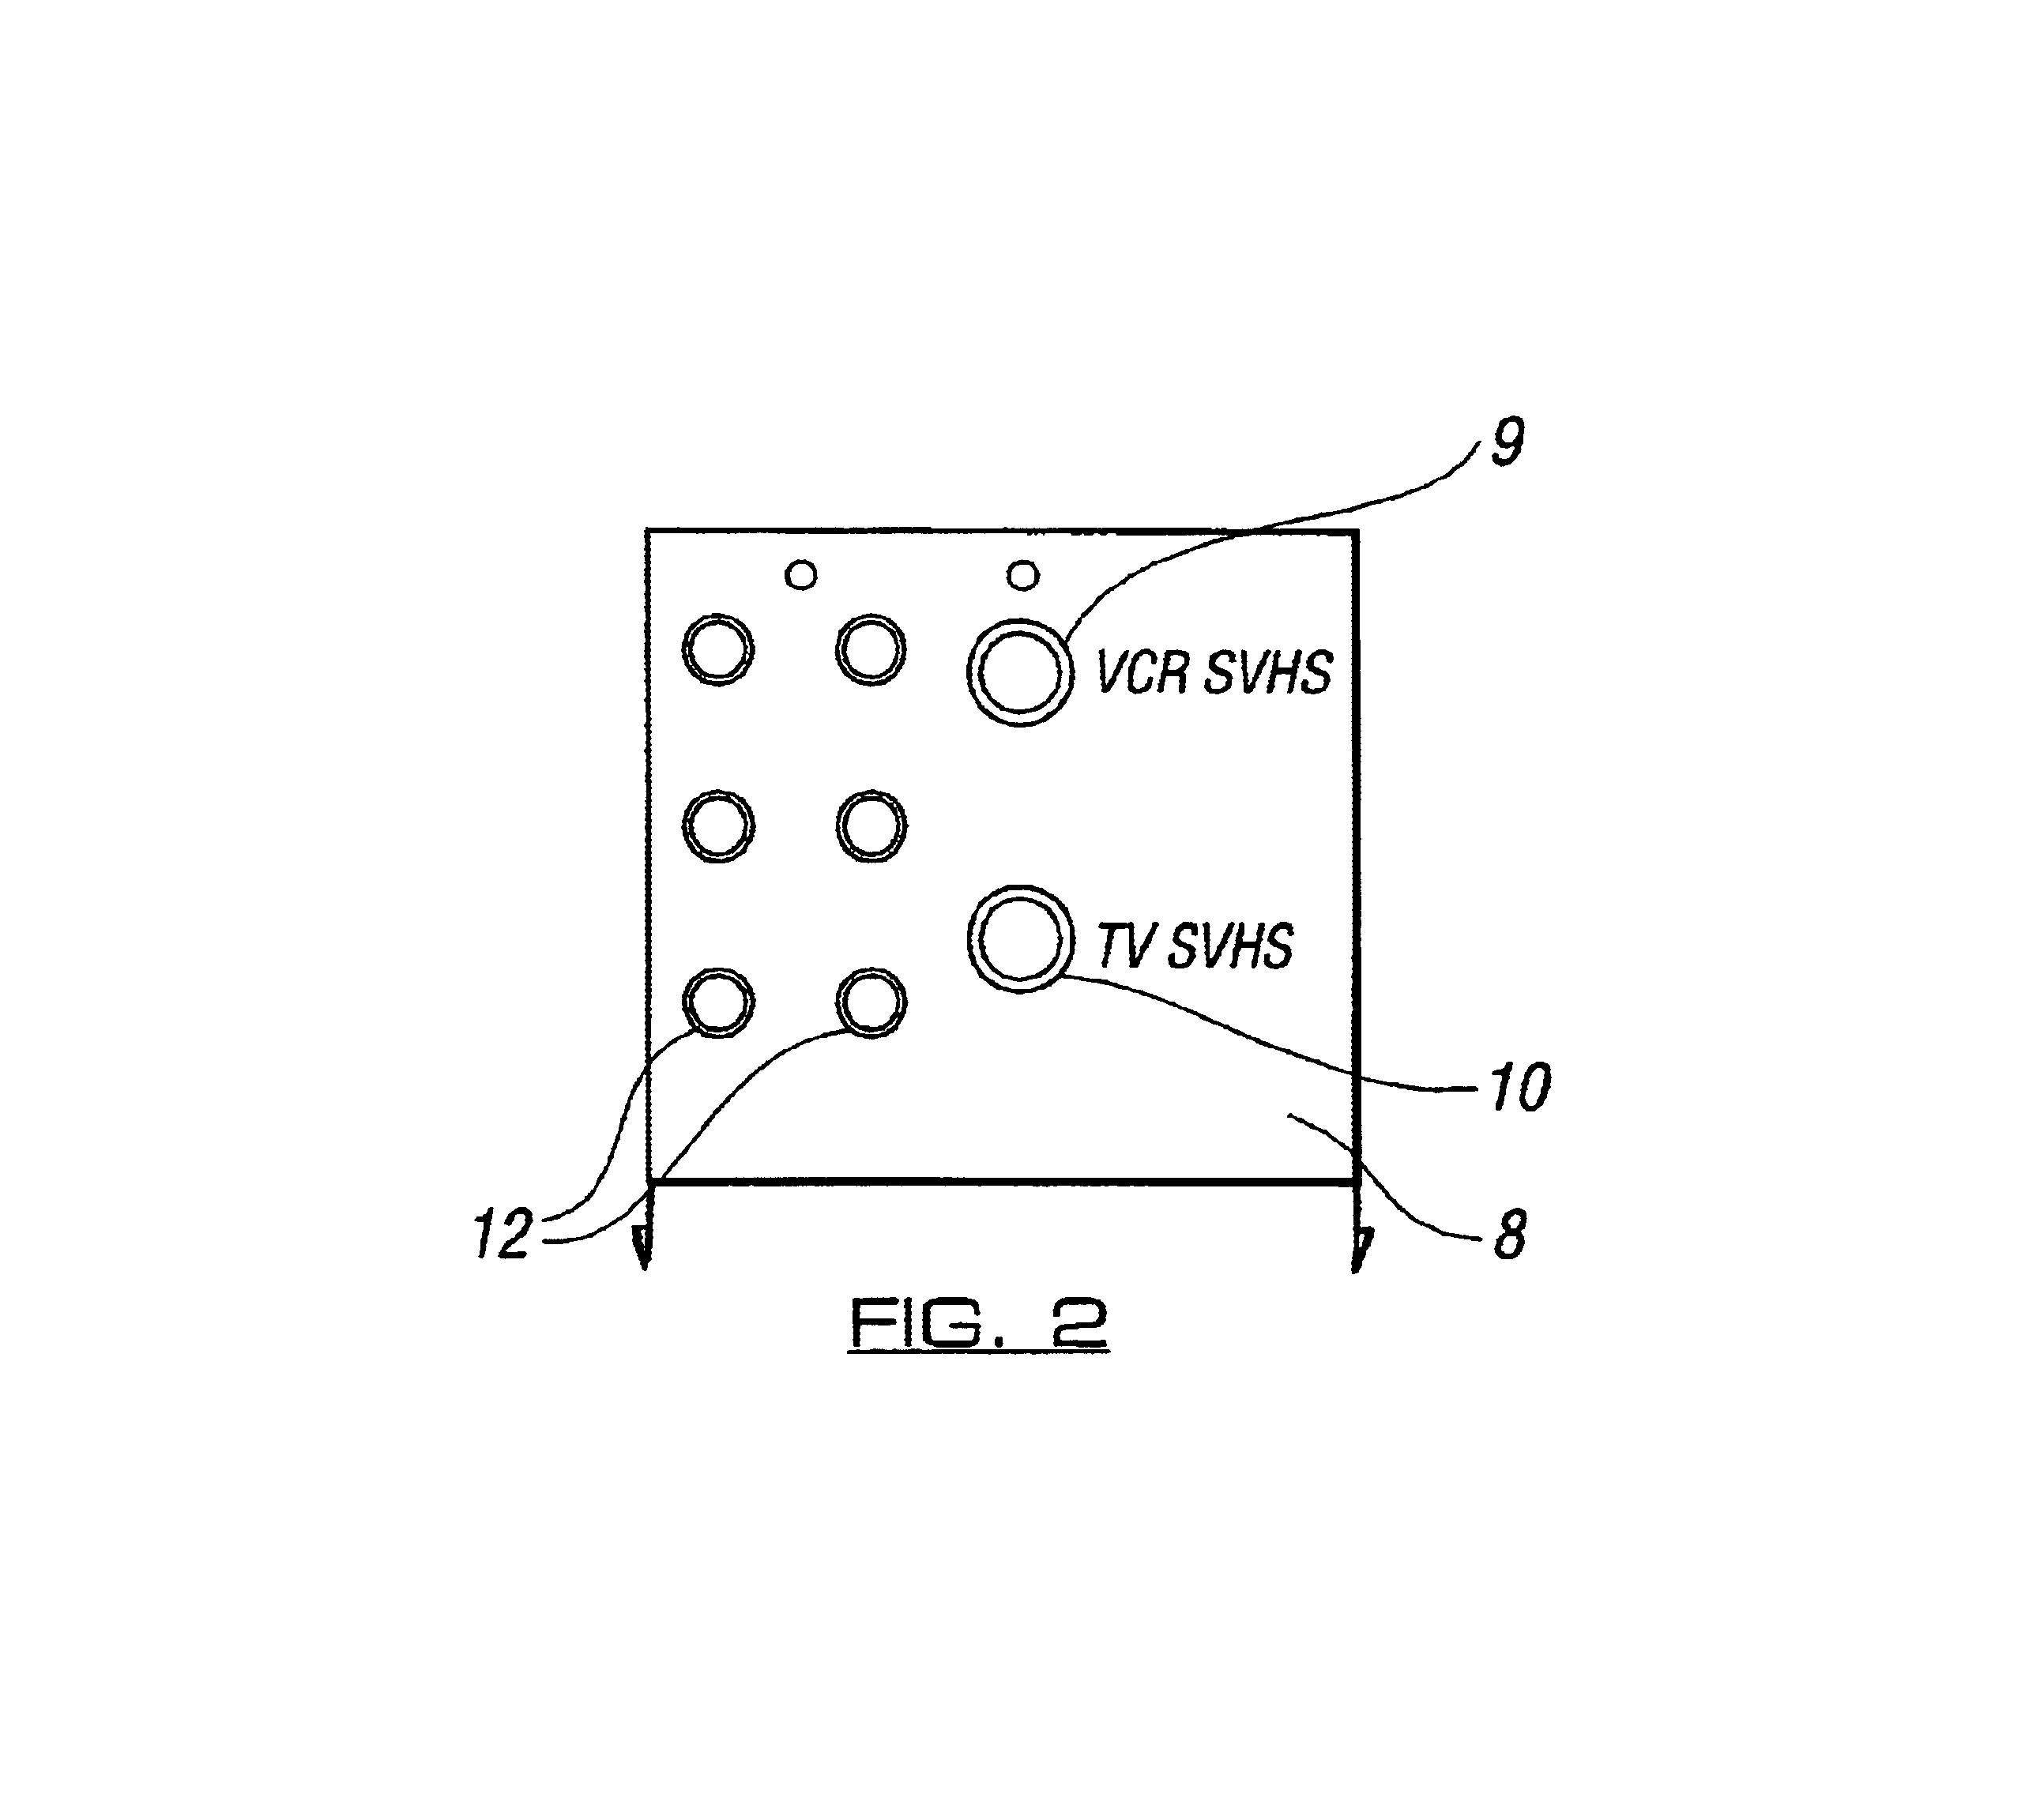 Adaptor to allow apparatus with non-scart connectors to connectors to connect to apparatus with scart connectors